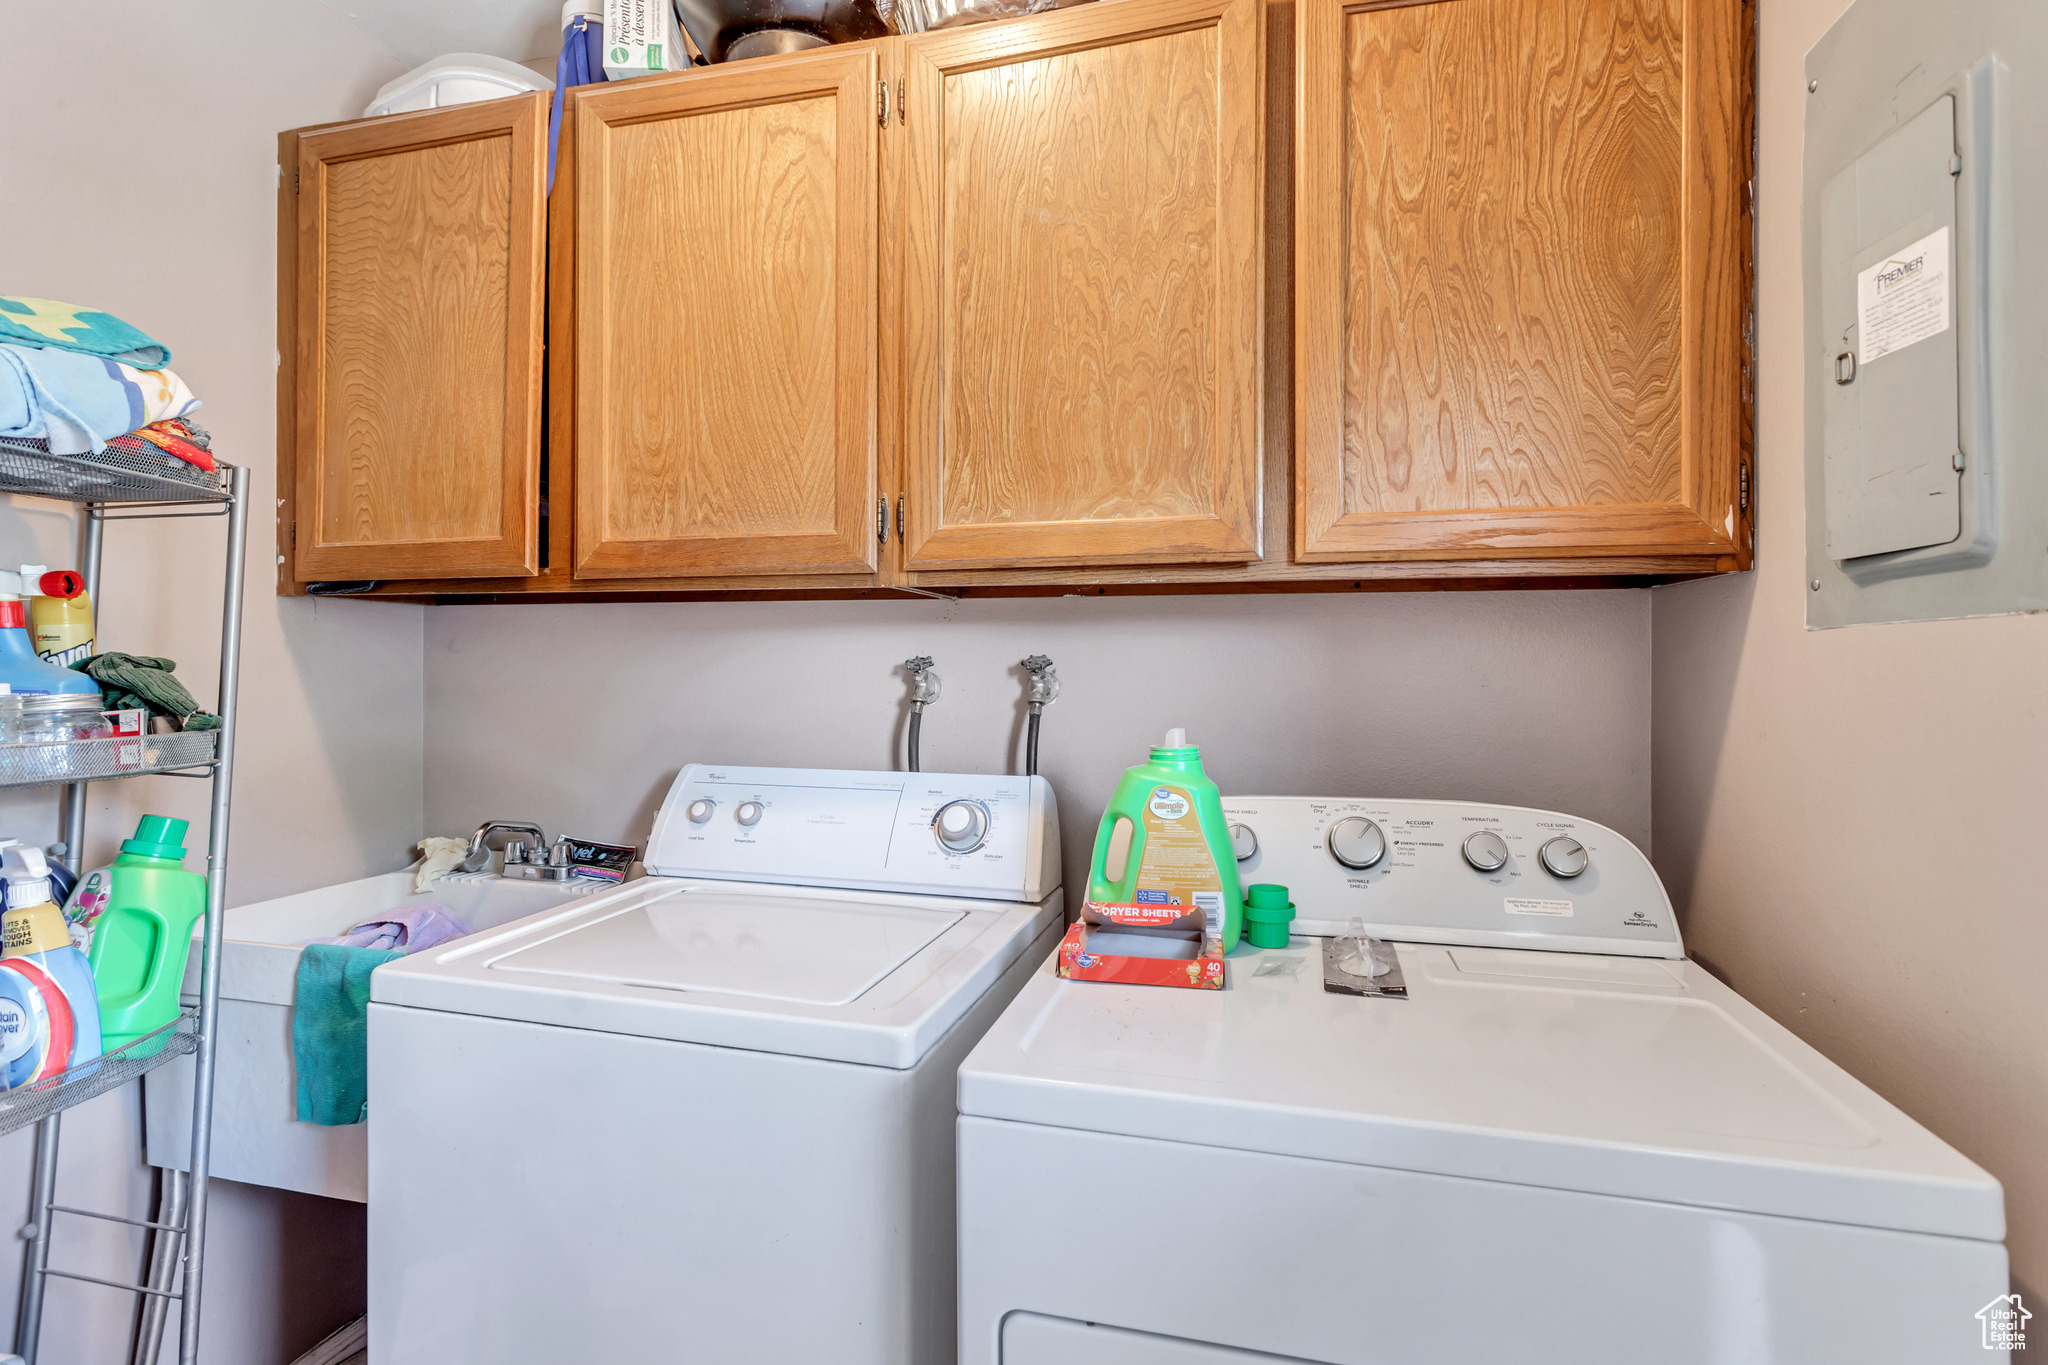 Laundry Room is on Main Level, just off of Kitchen